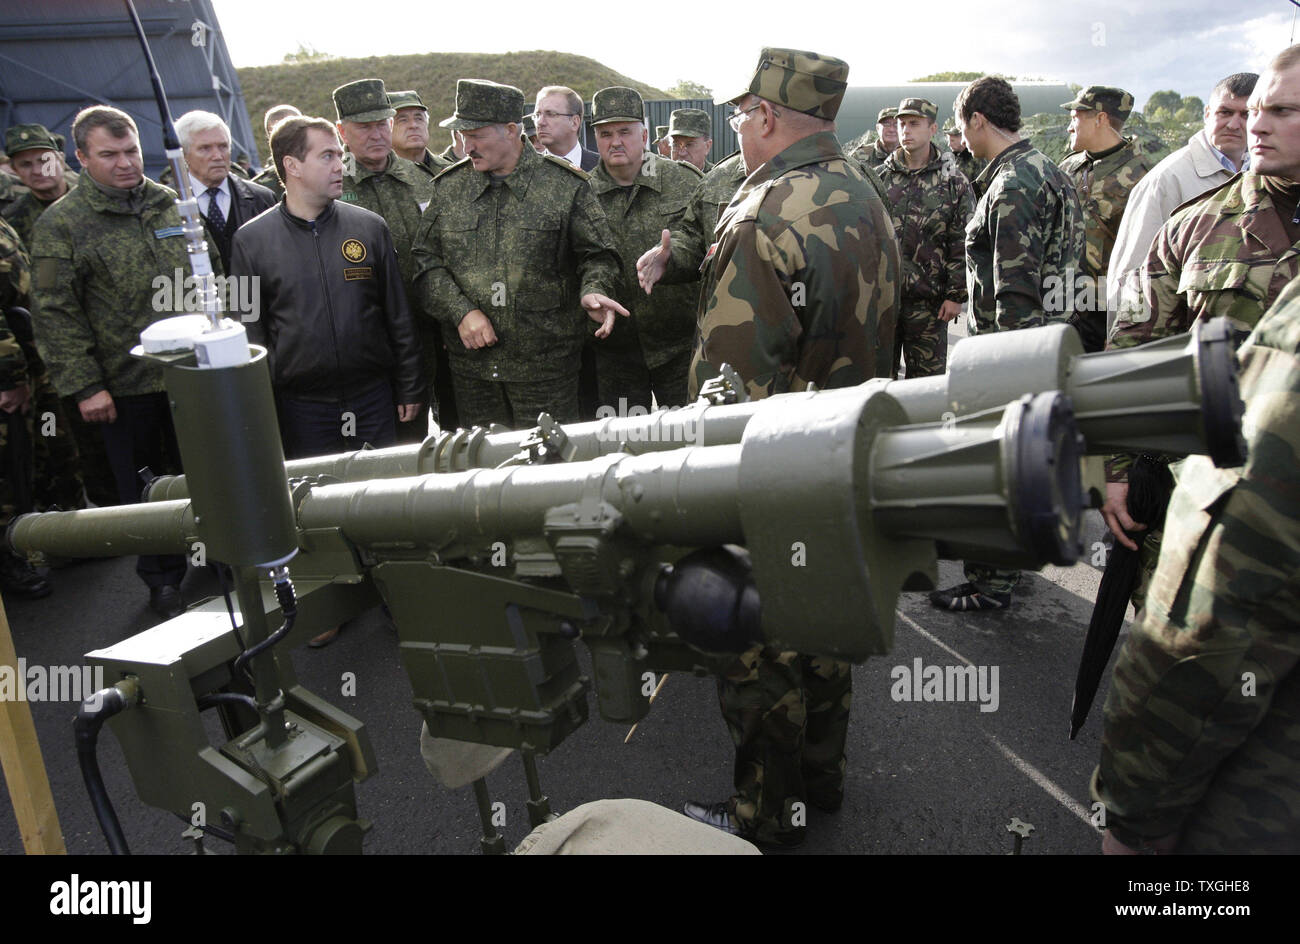 Russian President Dmitry Medvedev (2nd L) listens to Belorussian President Alexander Lukashenko as they inspect current and prototype military equipment  during the final stage of Zapad-2009 (West 2009) Russian-Belarus joint military exercises near Brest in western Belarus on September 29, 2009. UPI/Anatoli Zhdanov Stock Photo